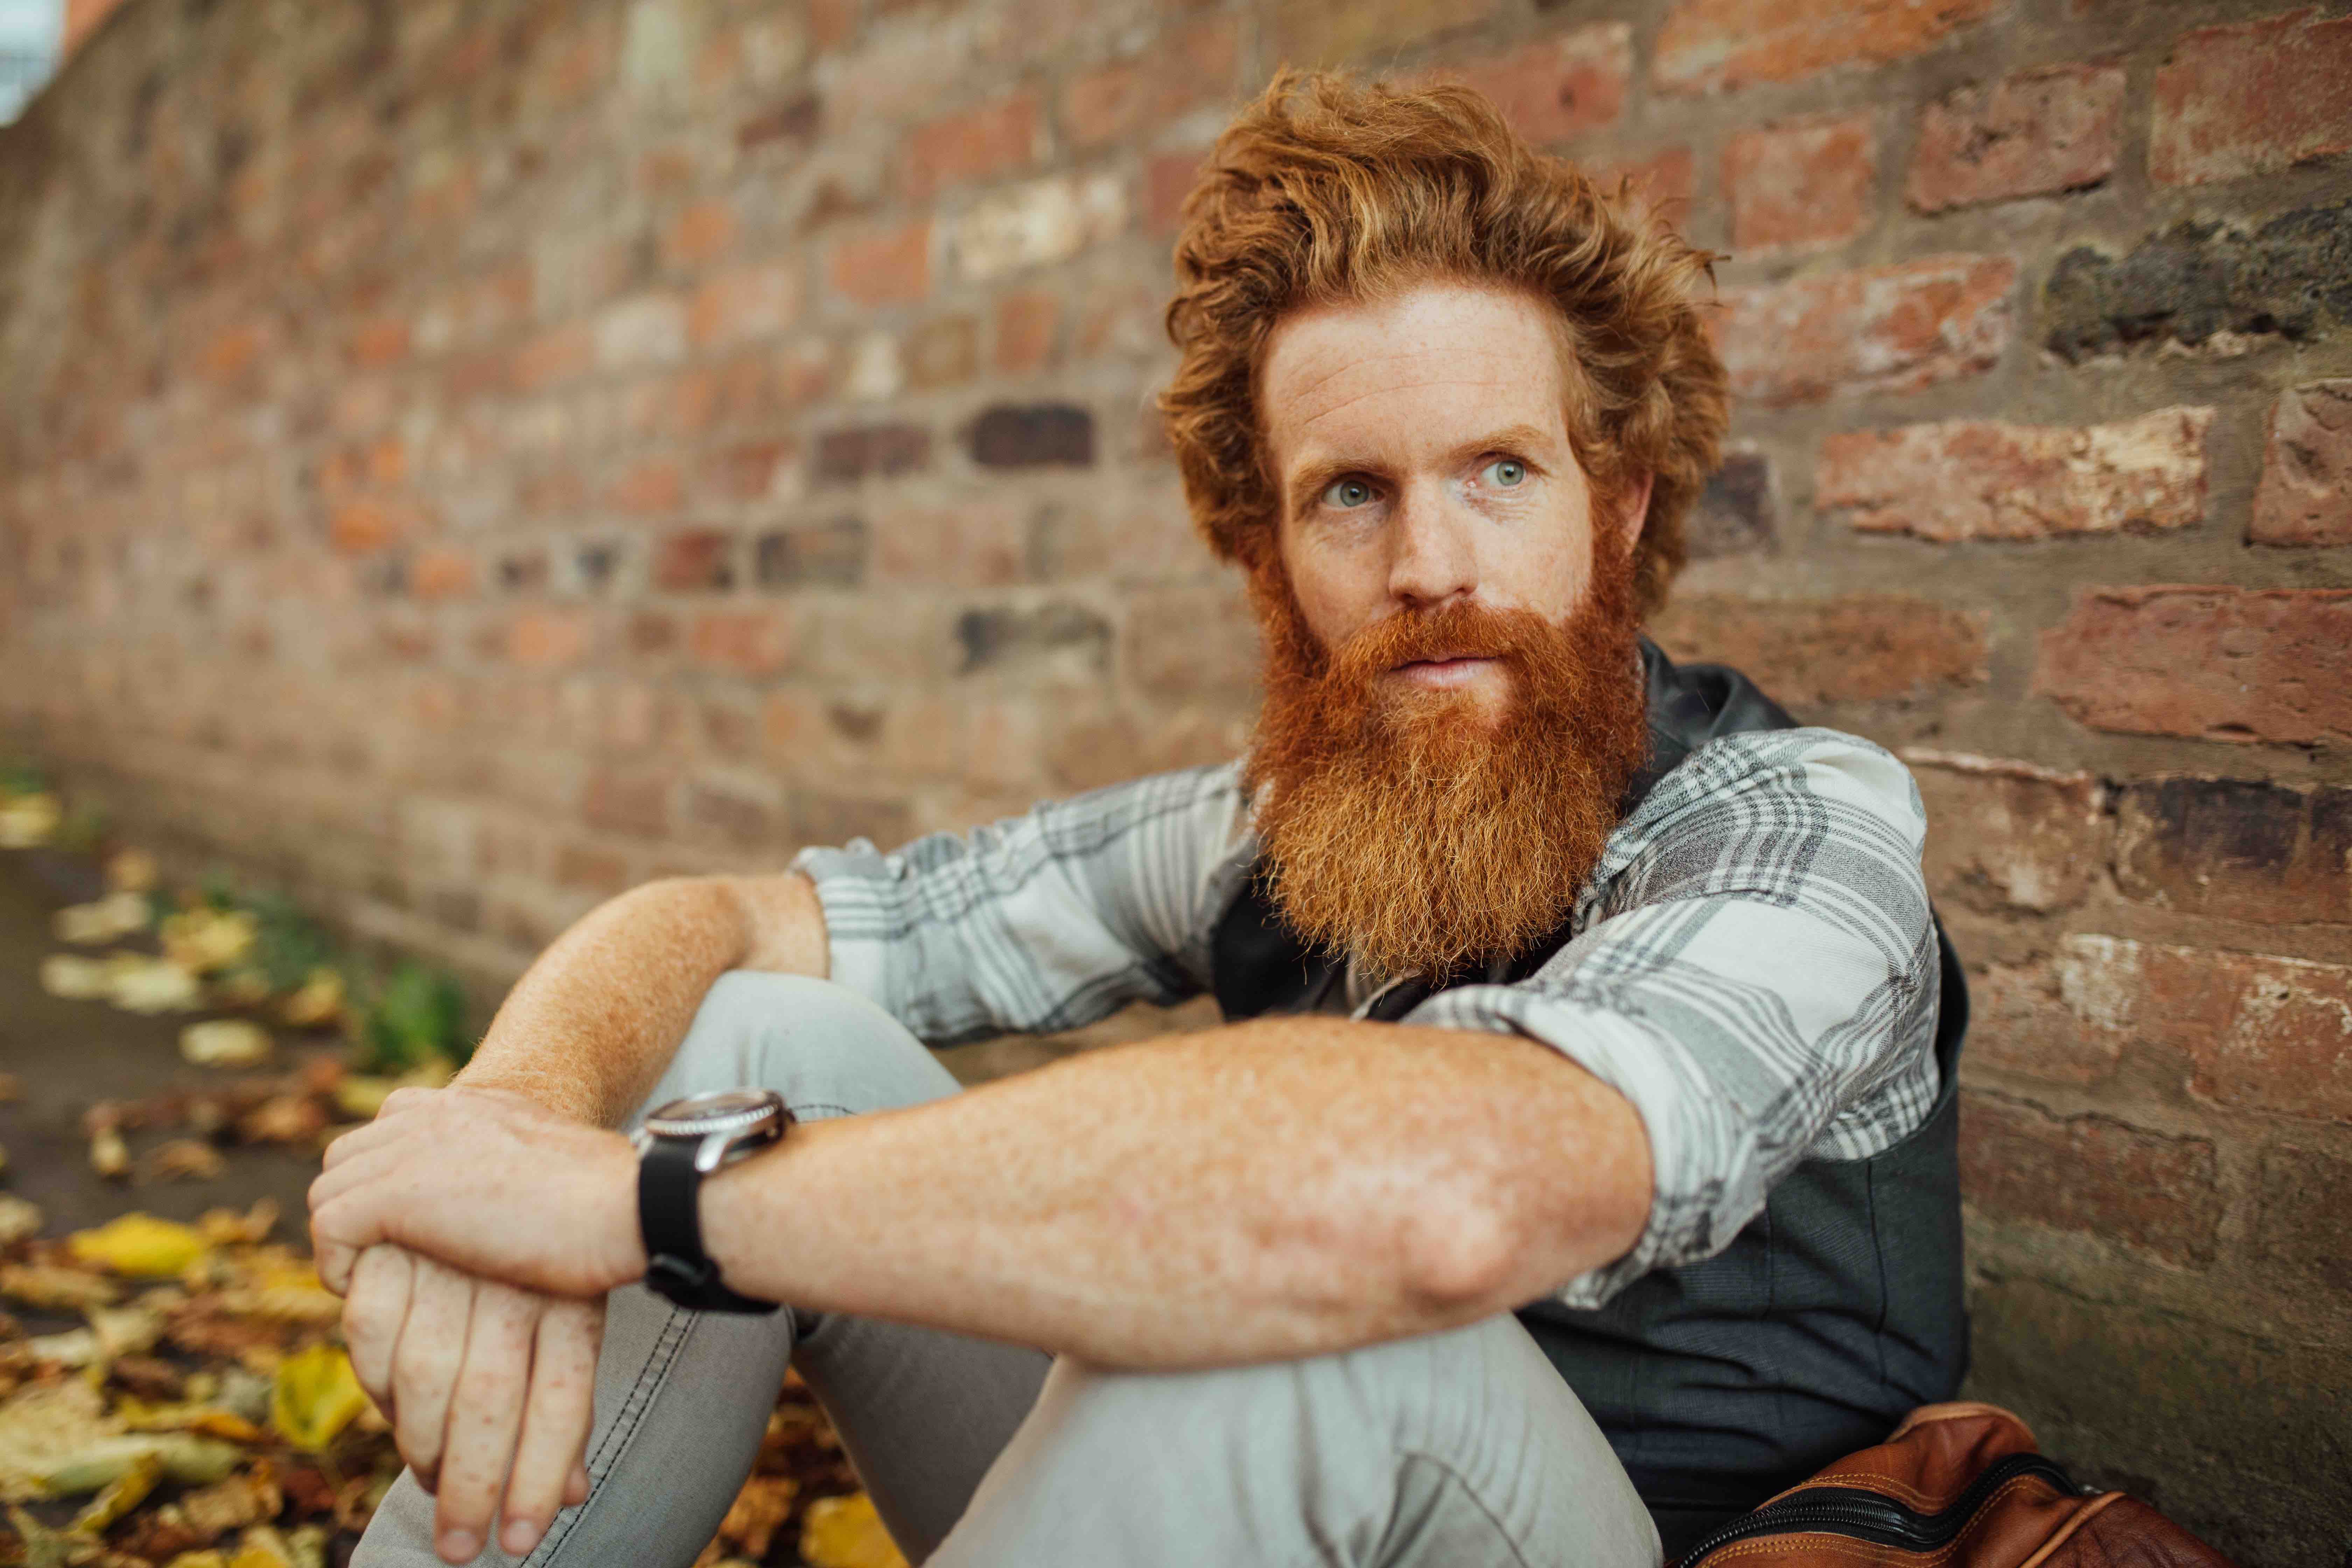 'The audience LOVED it!  I cannot think how he could have been better.' ITV on Sean Conway